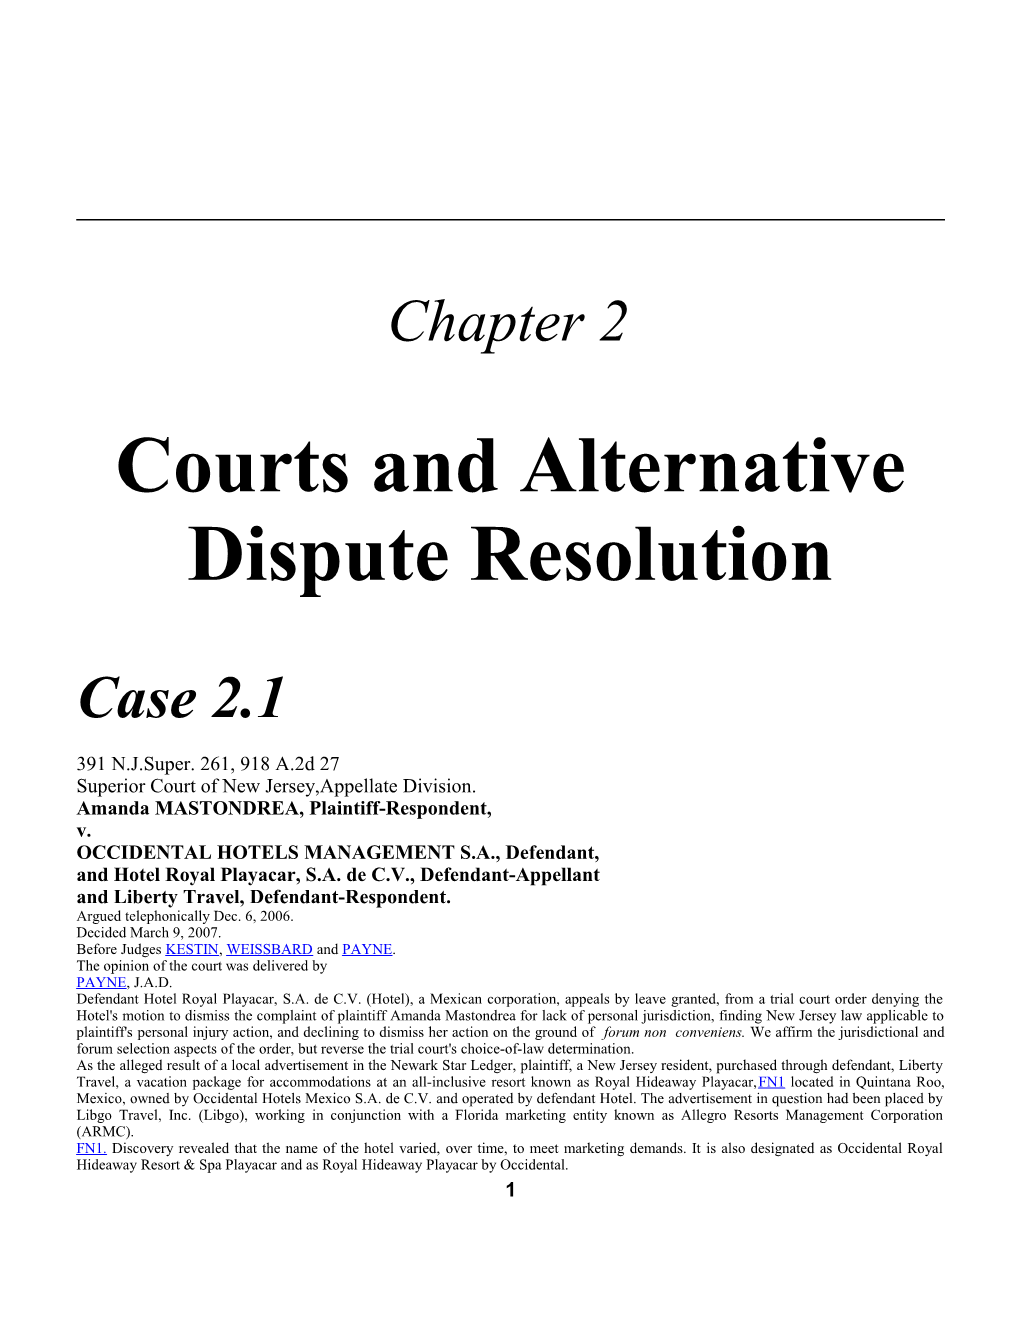 Courts and Alternative Dispute Resolution